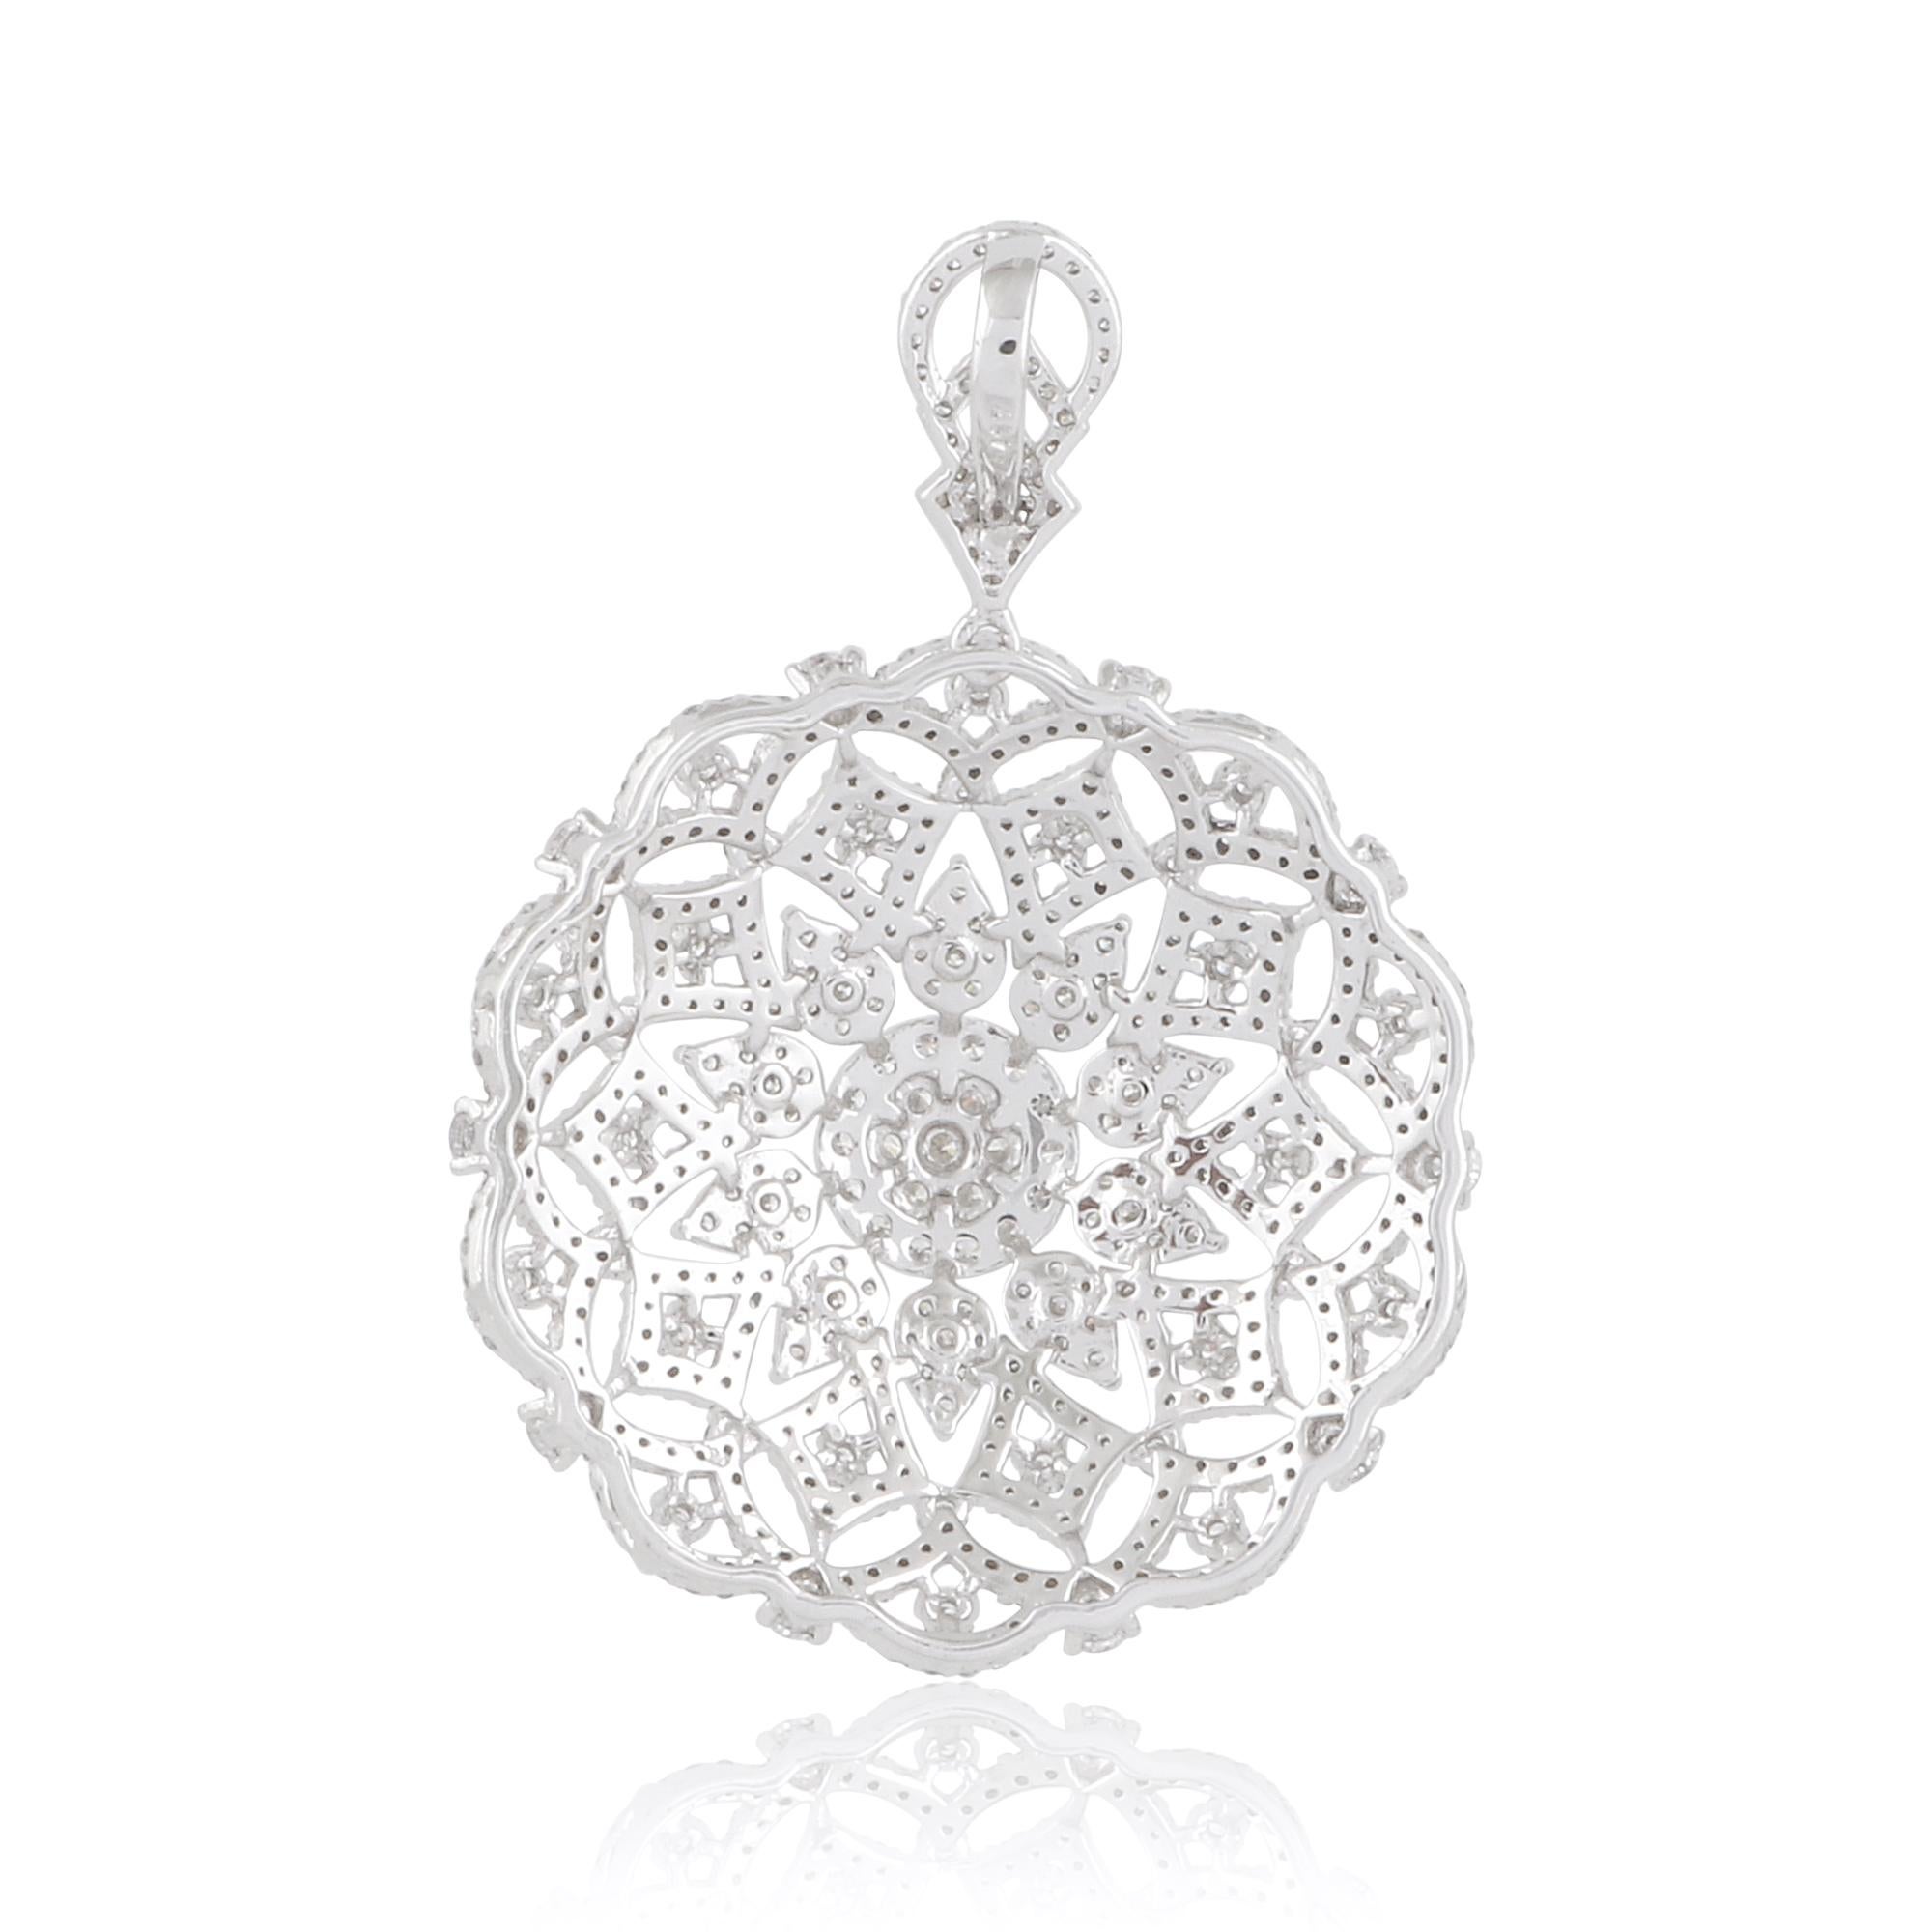 Immerse yourself in the enchanting beauty of this exquisite diamond flower design pendant, meticulously handcrafted in 10 karat white gold. With a remarkable total carat weight of 3.65 carats, this fine jewelry piece captures the essence of